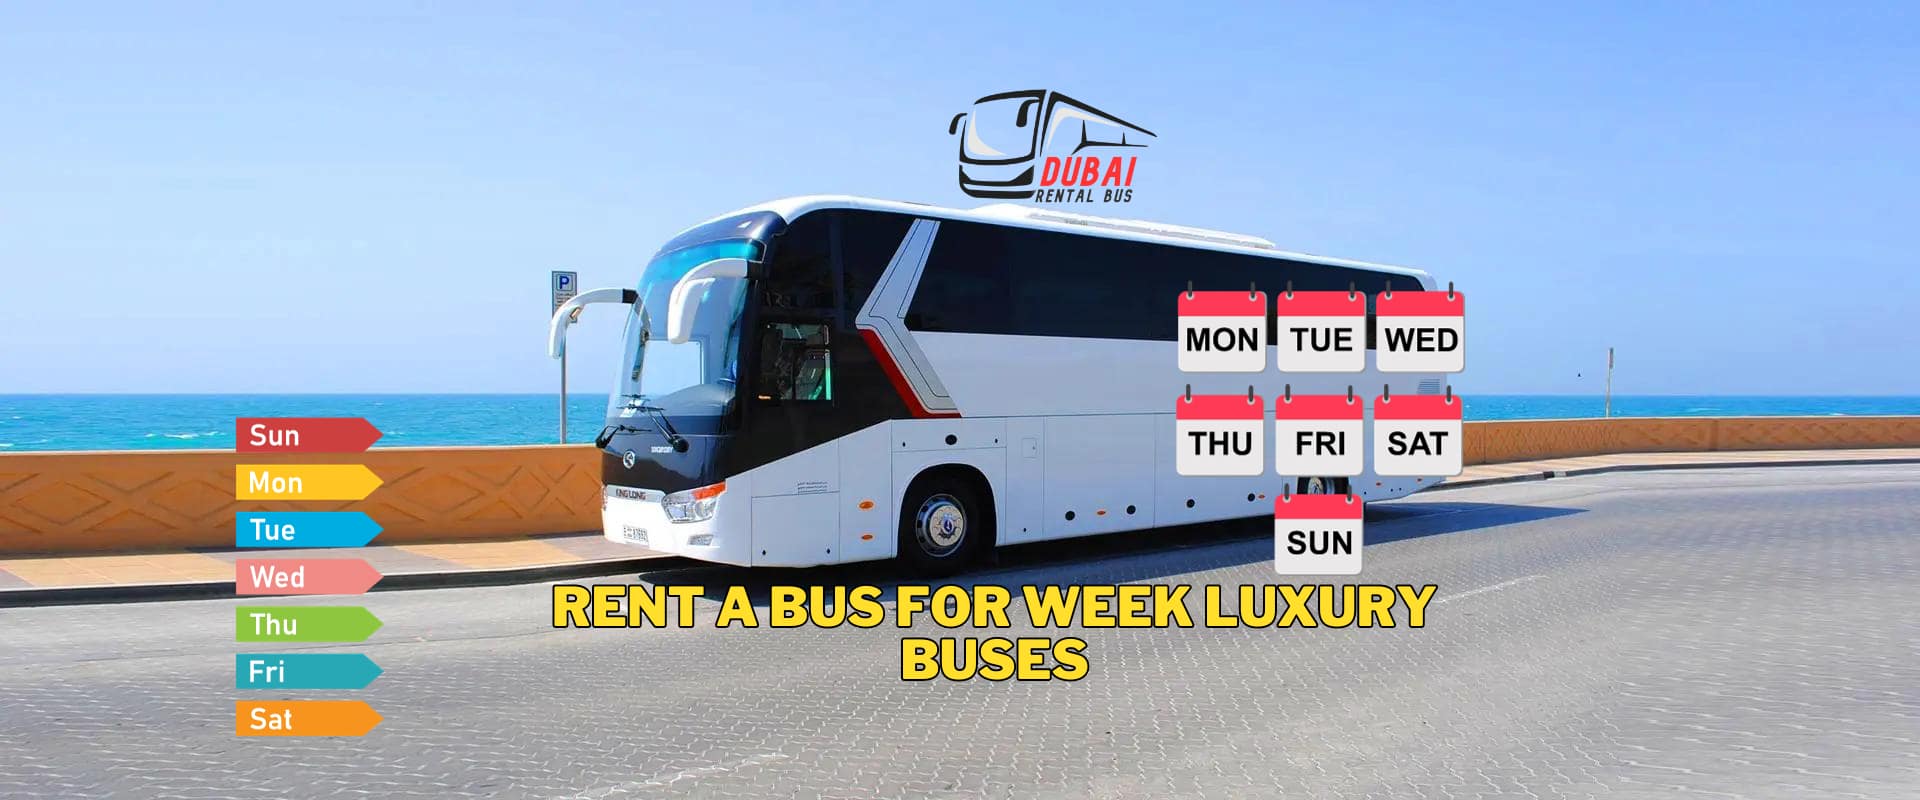 Rent A Bus For Week Luxury Buses